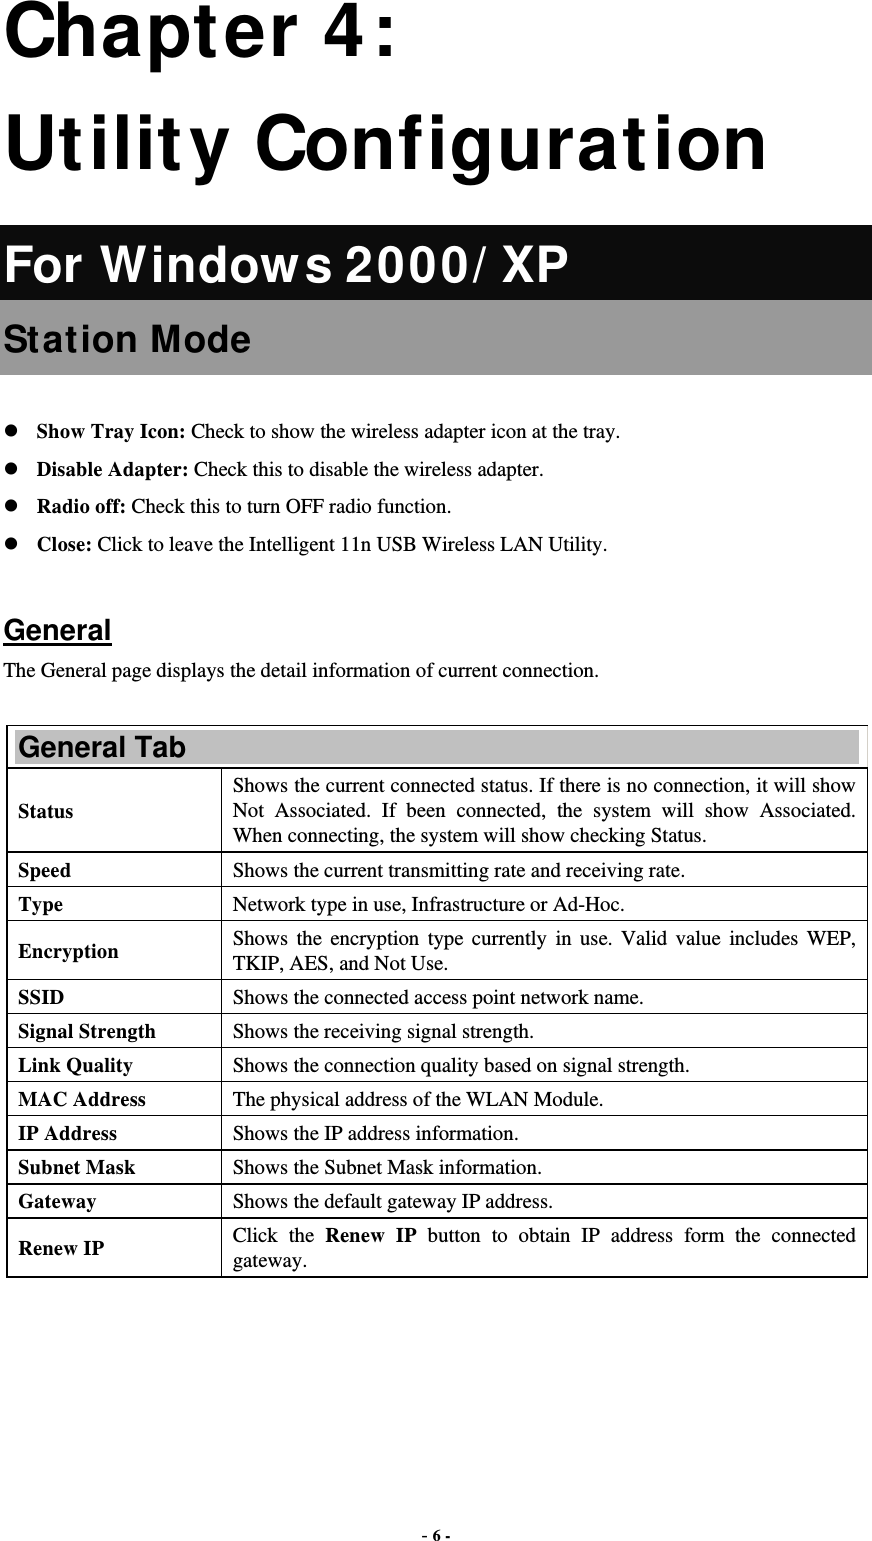  - 6 - Chapter 4: Utility Configuration For Window s 2000/ XP Station Mode  Show Tray Icon: Check to show the wireless adapter icon at the tray. Disable Adapter: Check this to disable the wireless adapter. Radio off: Check this to turn OFF radio function. Close: Click to leave the Intelligent 11n USB Wireless LAN Utility.  General The General page displays the detail information of current connection.  General Tab Status Shows the current connected status. If there is no connection, it will show Not Associated. If been connected, the system will show Associated. When connecting, the system will show checking Status. Speed  Shows the current transmitting rate and receiving rate. Type  Network type in use, Infrastructure or Ad-Hoc. Encryption  Shows the encryption type currently in use. Valid value includes WEP, TKIP, AES, and Not Use. SSID  Shows the connected access point network name. Signal Strength  Shows the receiving signal strength. Link Quality  Shows the connection quality based on signal strength. MAC Address  The physical address of the WLAN Module. IP Address  Shows the IP address information. Subnet Mask  Shows the Subnet Mask information. Gateway  Shows the default gateway IP address. Renew IP  Click the Renew IP button to obtain IP address form the connected gateway. 